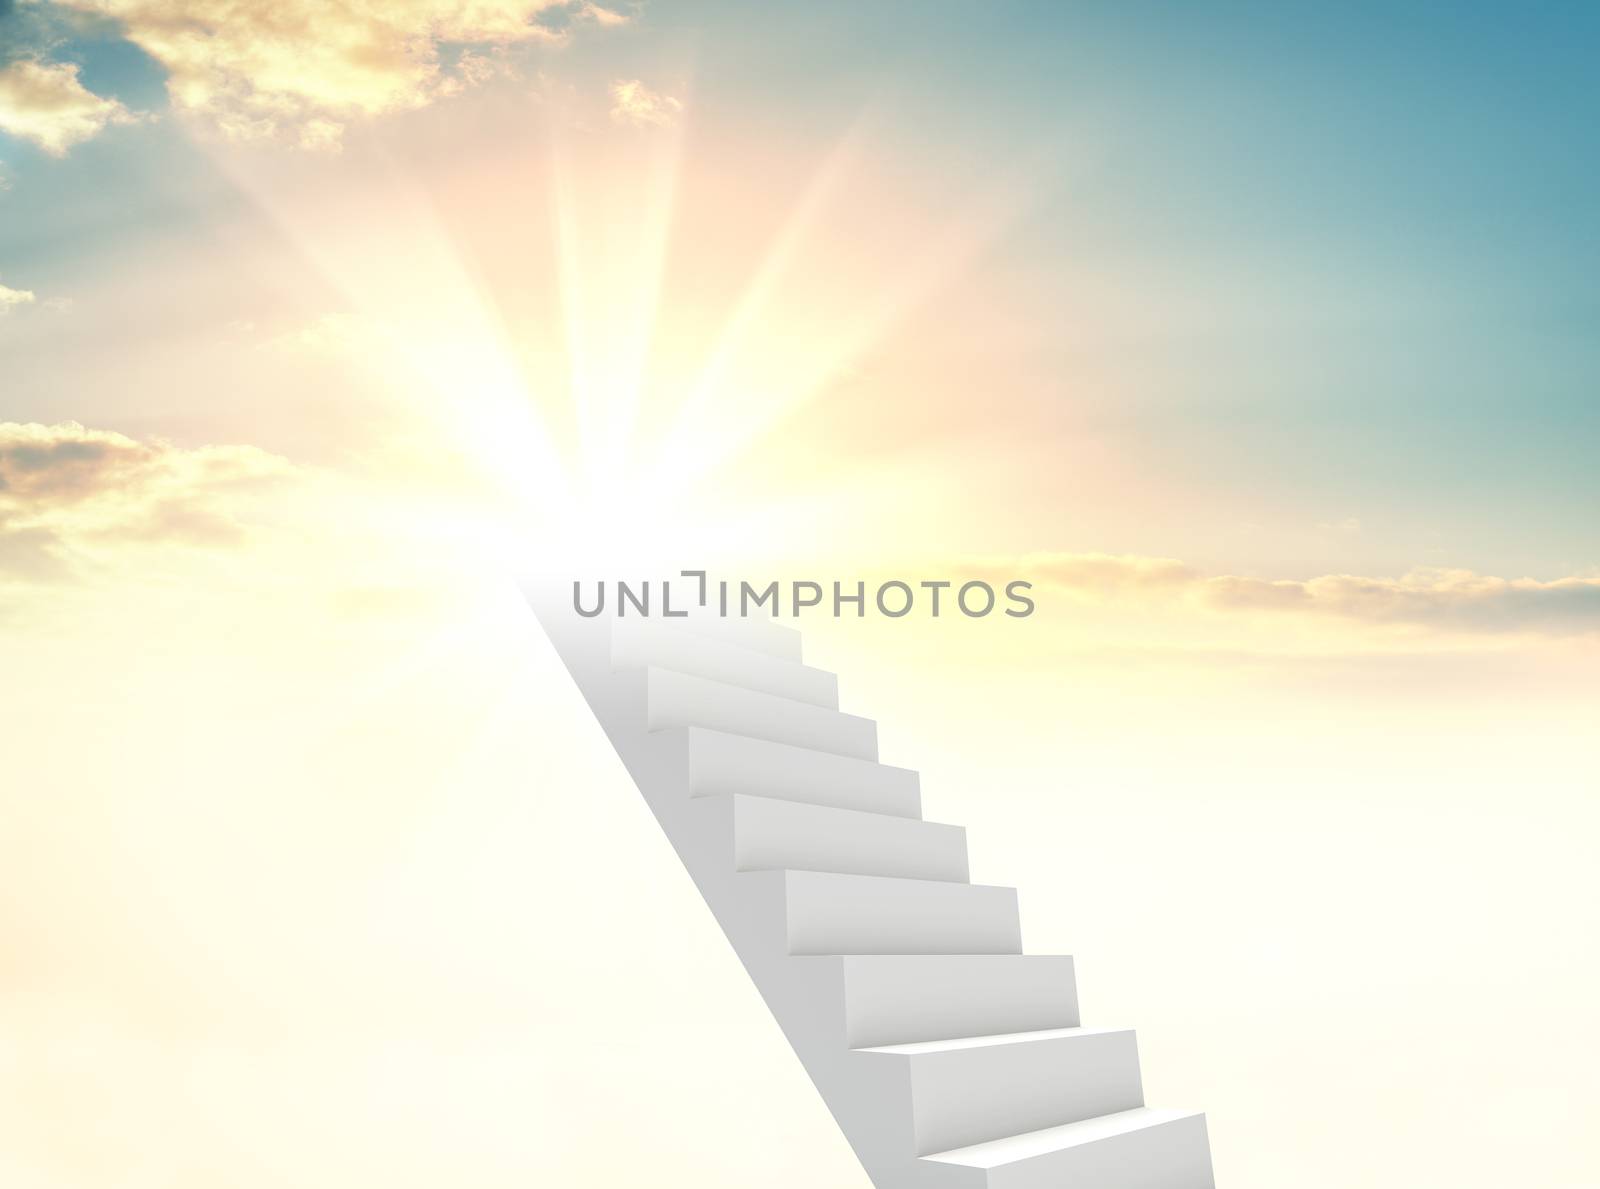 The white staircase is going up in the sun by cherezoff